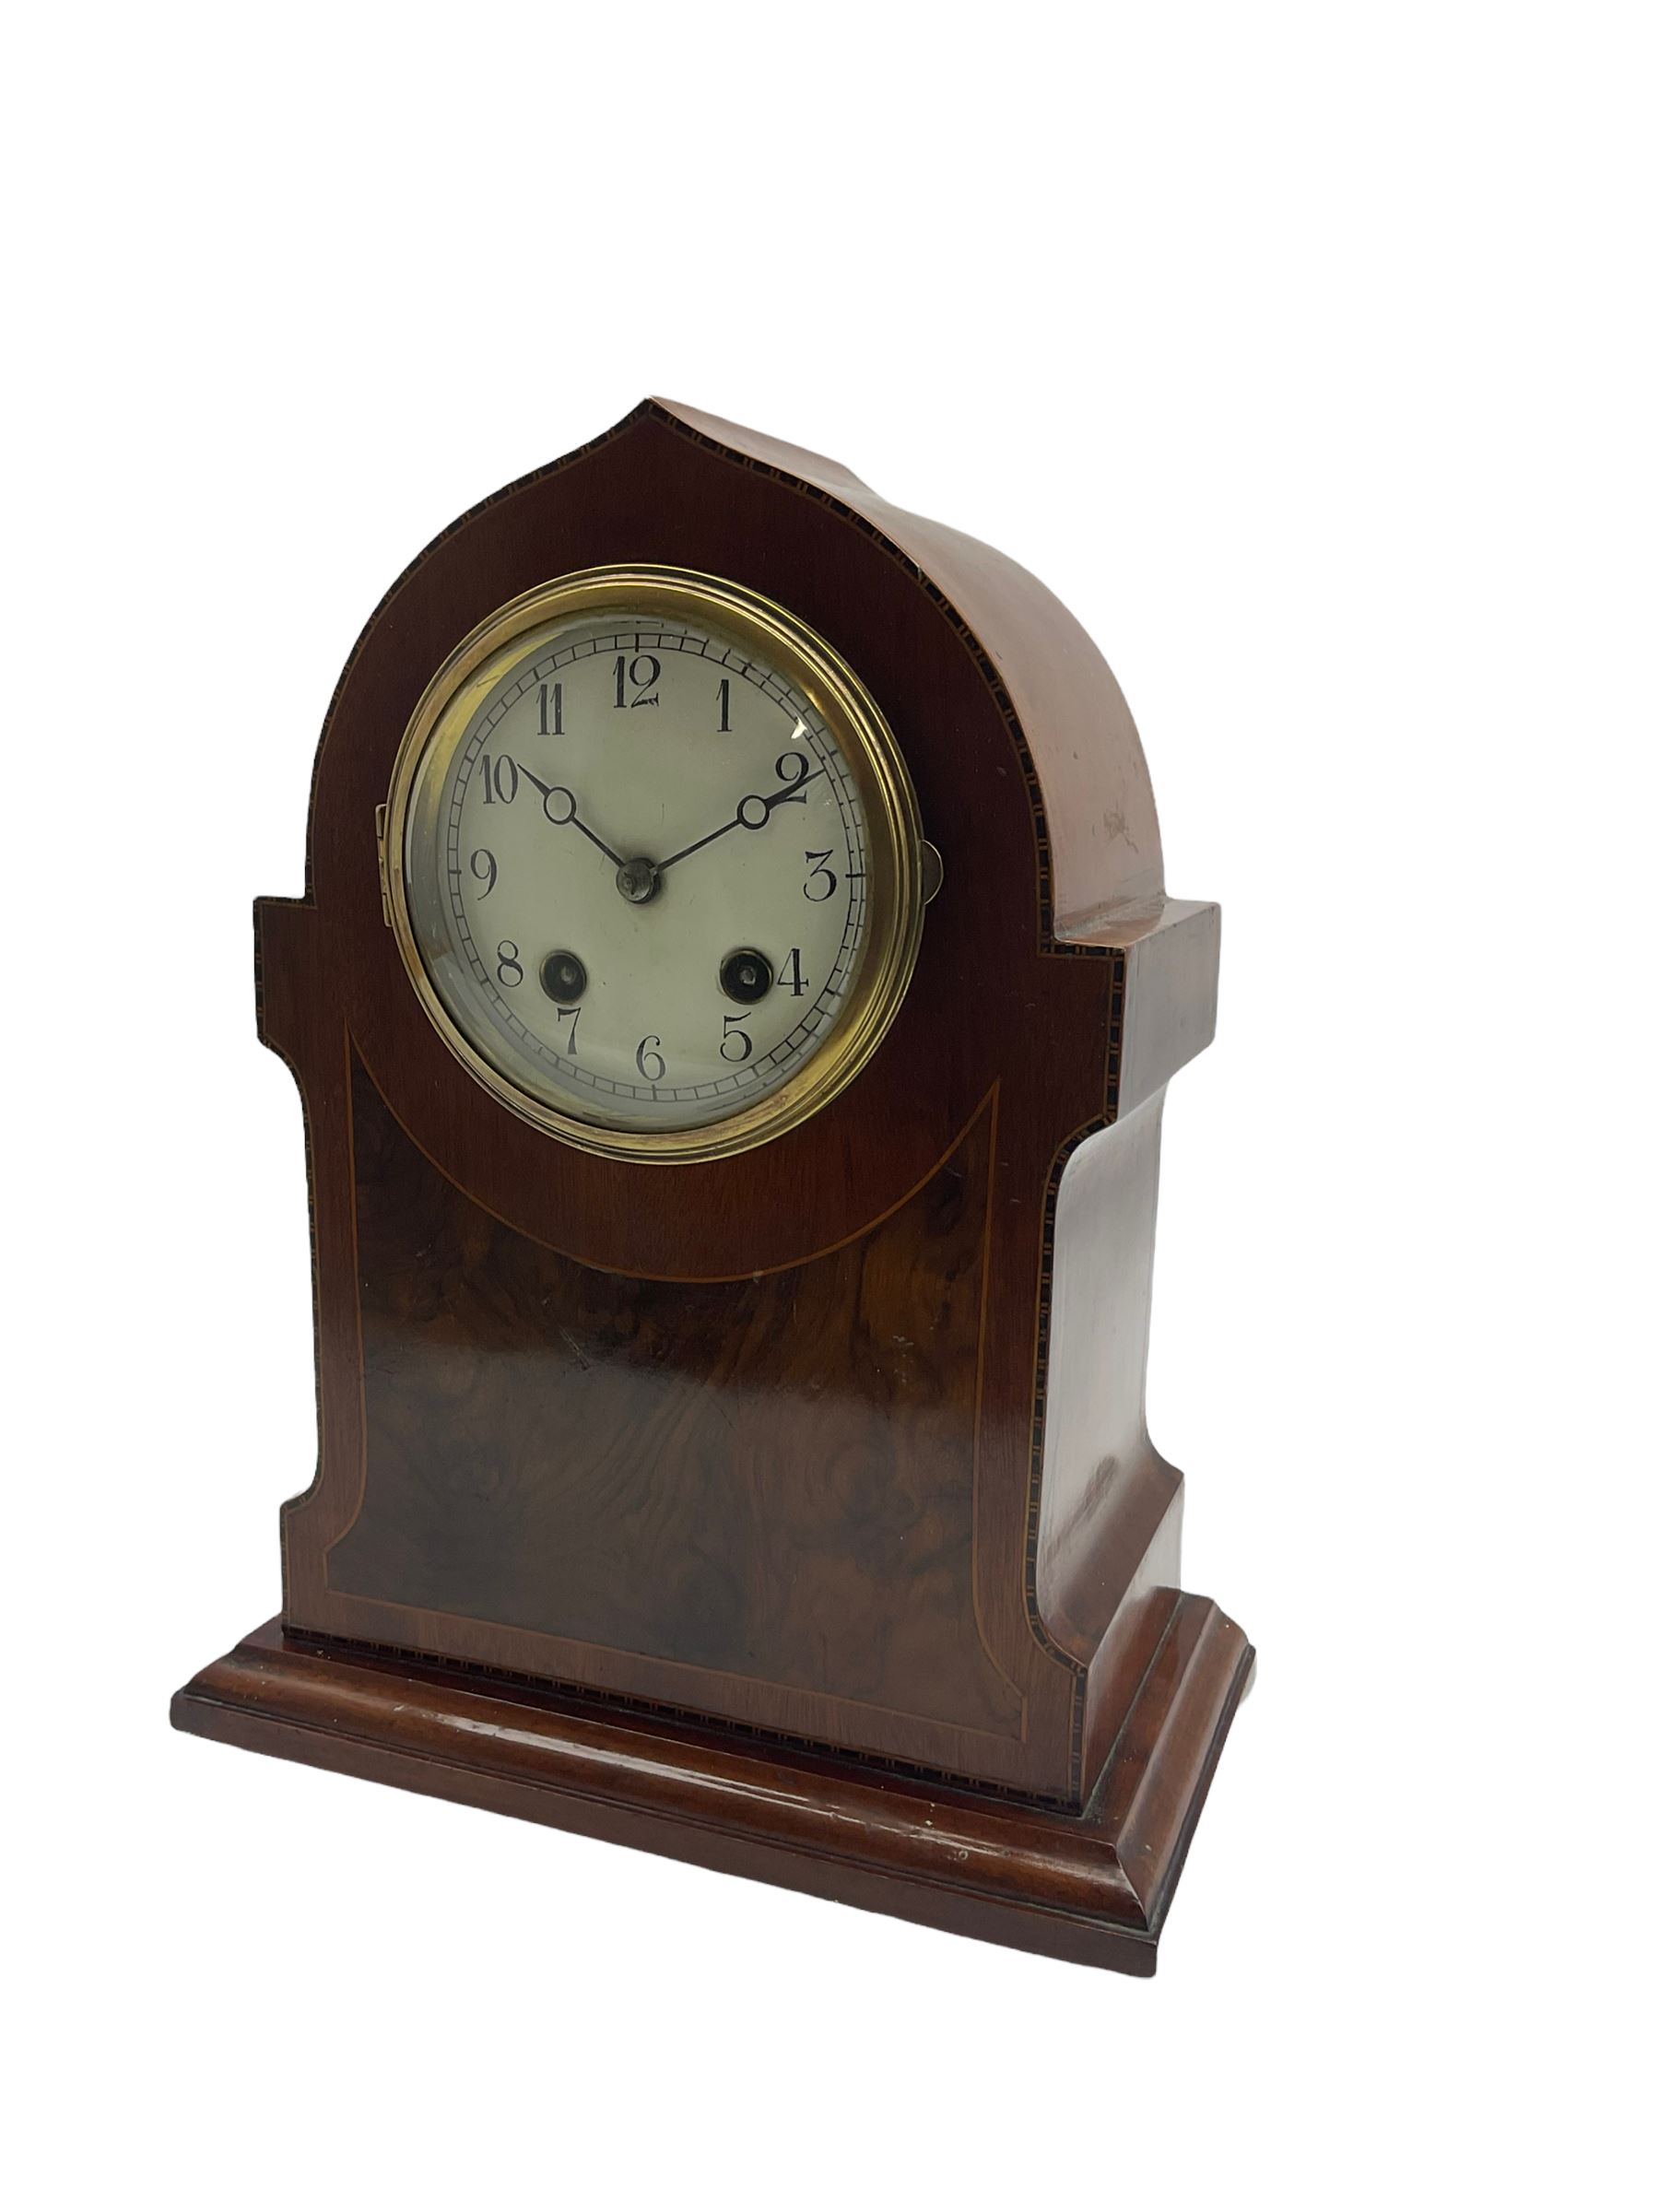 An Edwardian c1910 mahogany veneered mantle clock in a pointed arch case with inlaid satinwood strin - Image 2 of 3